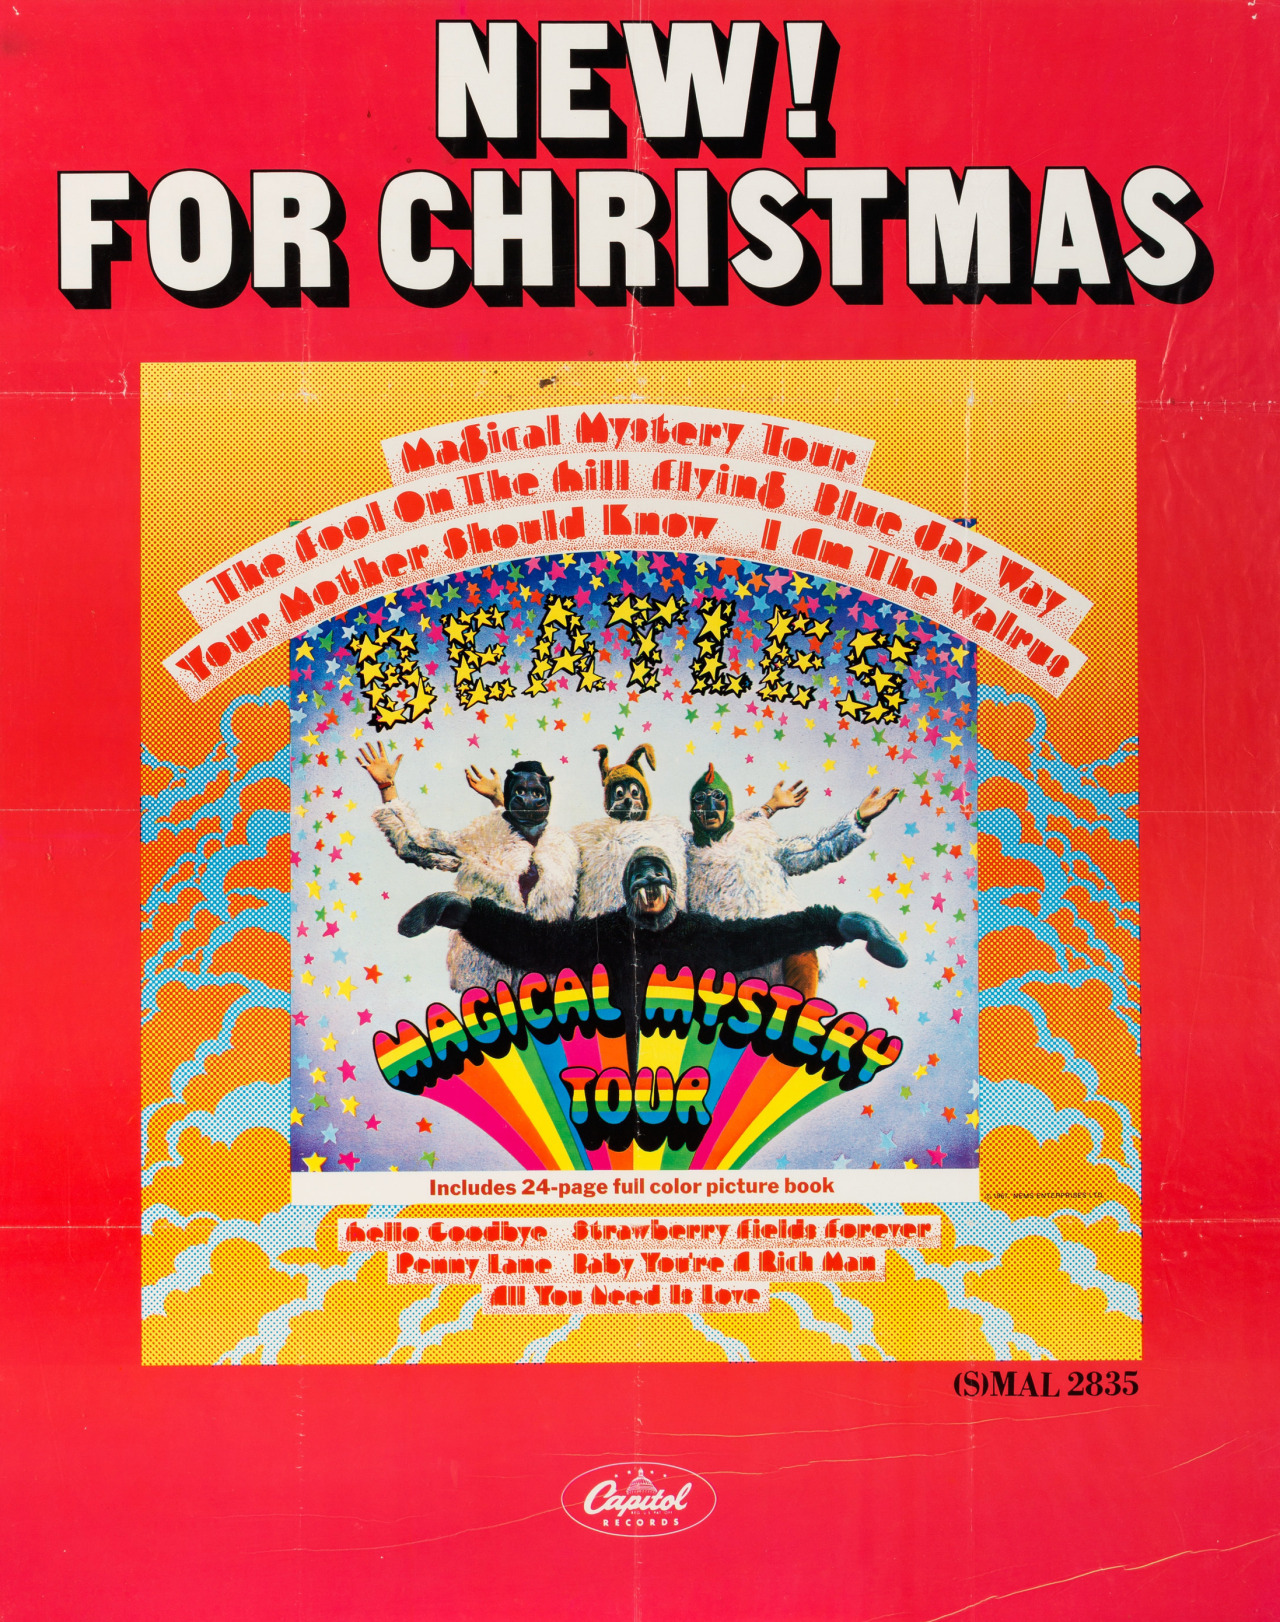 Capitol Records - The Beatles 'Magical Mystery Tour' poster - 1967